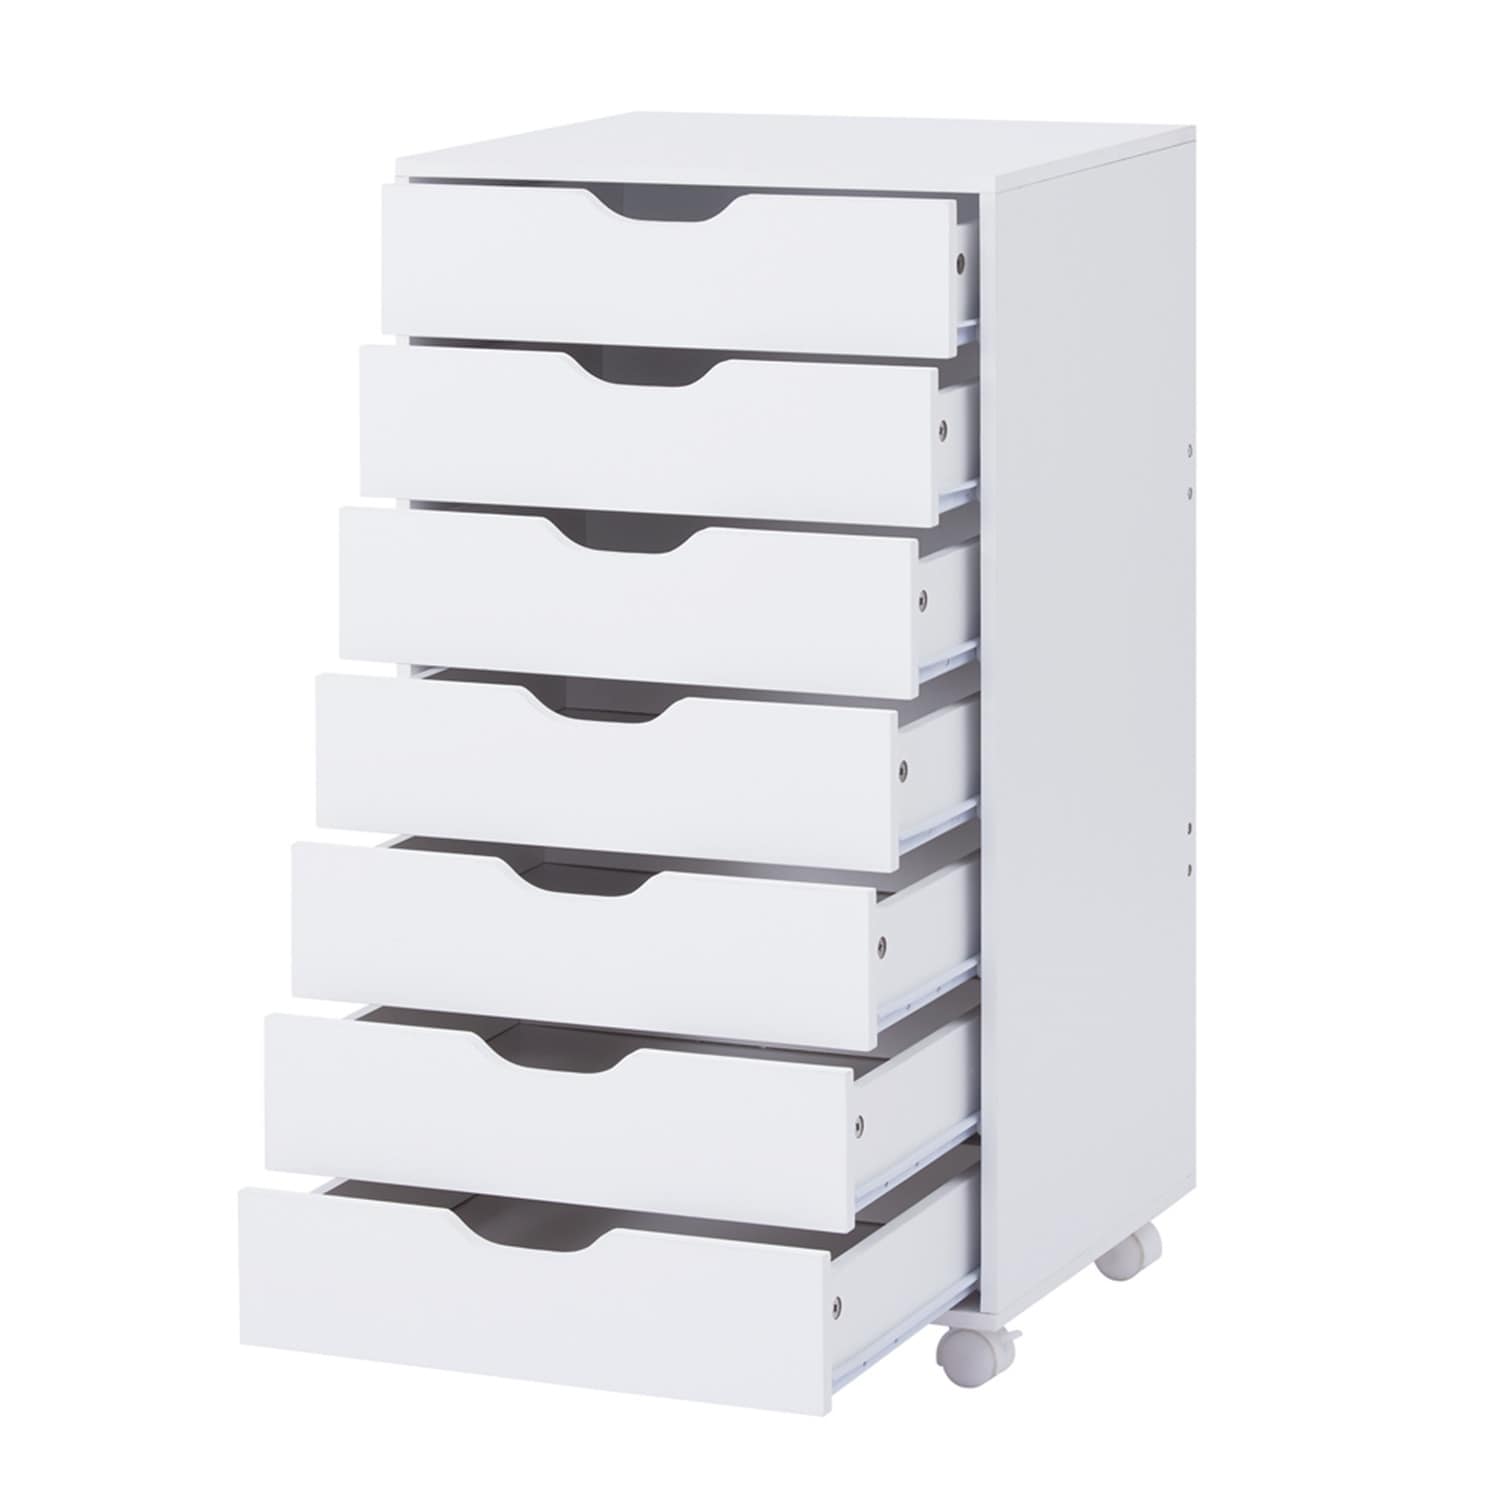 Office File Cabinets Wooden File Cabinets for Home Office Lateral File Cabinet File Cabinet Mobile File Storage Drawer Cabinet White - image 3 of 6